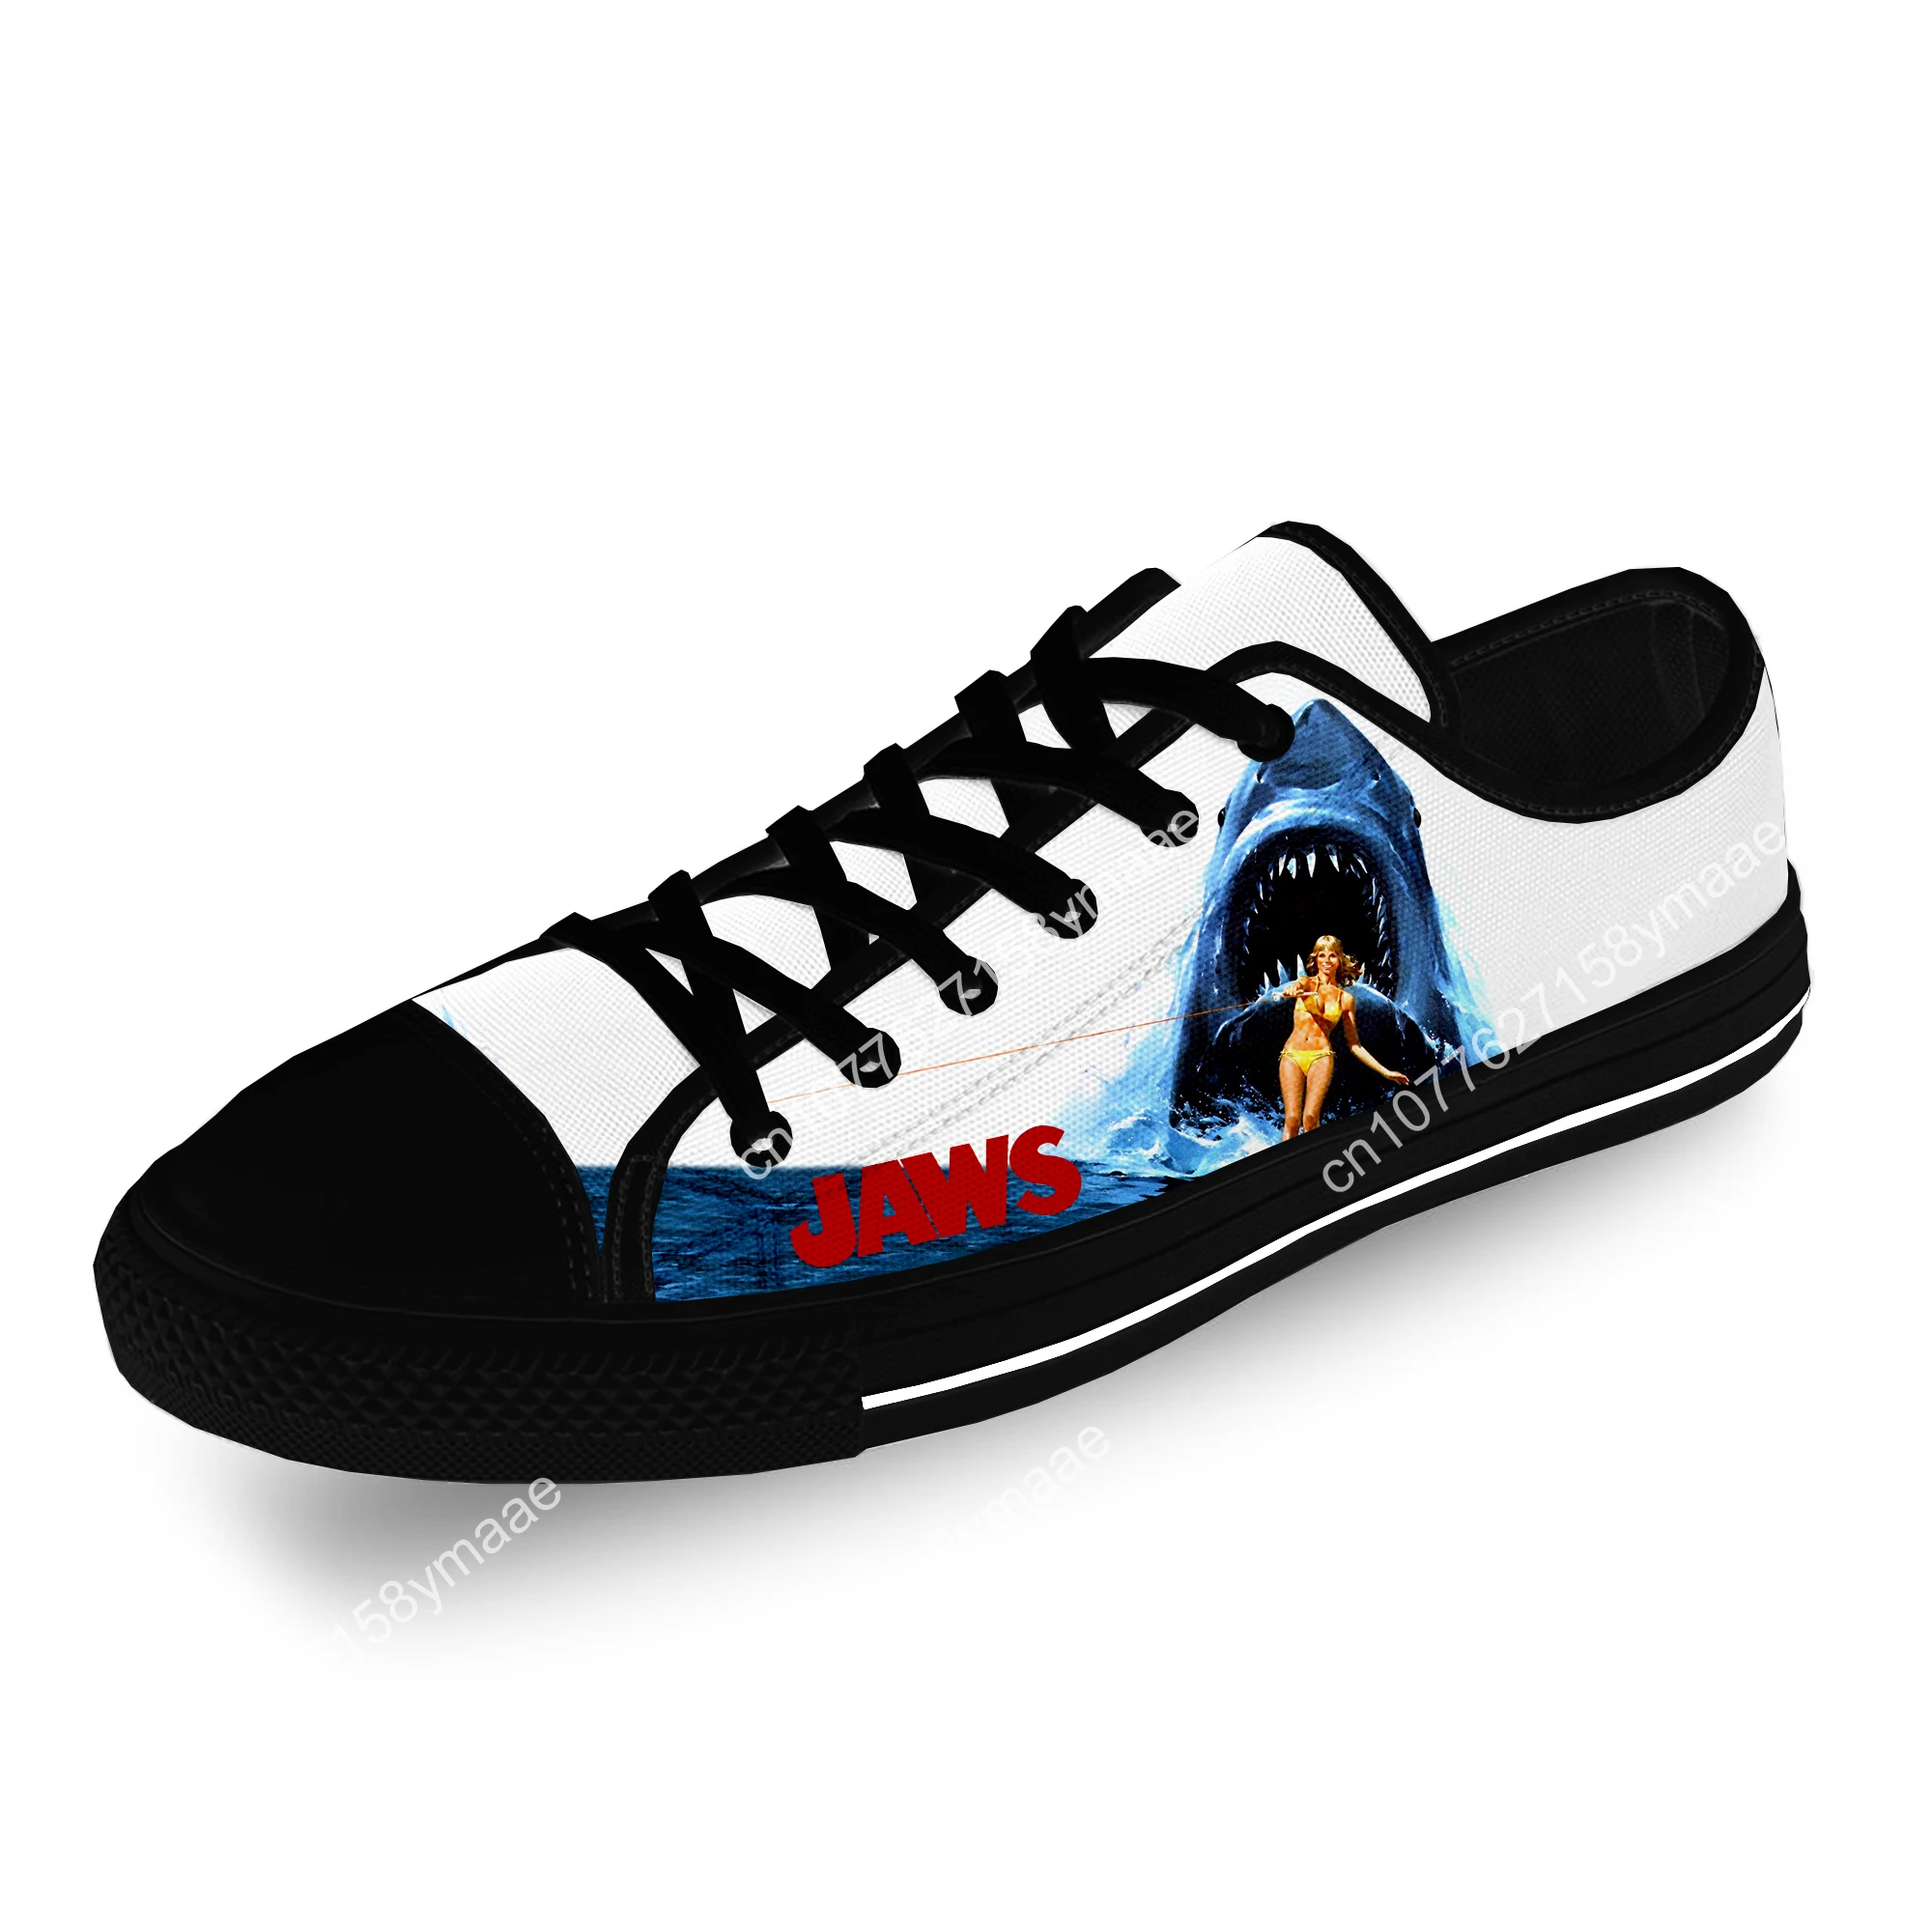 Jaws Movie Shark Horror Casual Funny Cloth 3D Print Low Top Canvas Fashion Shoes Men Women Lightweight Breathable Sneakers